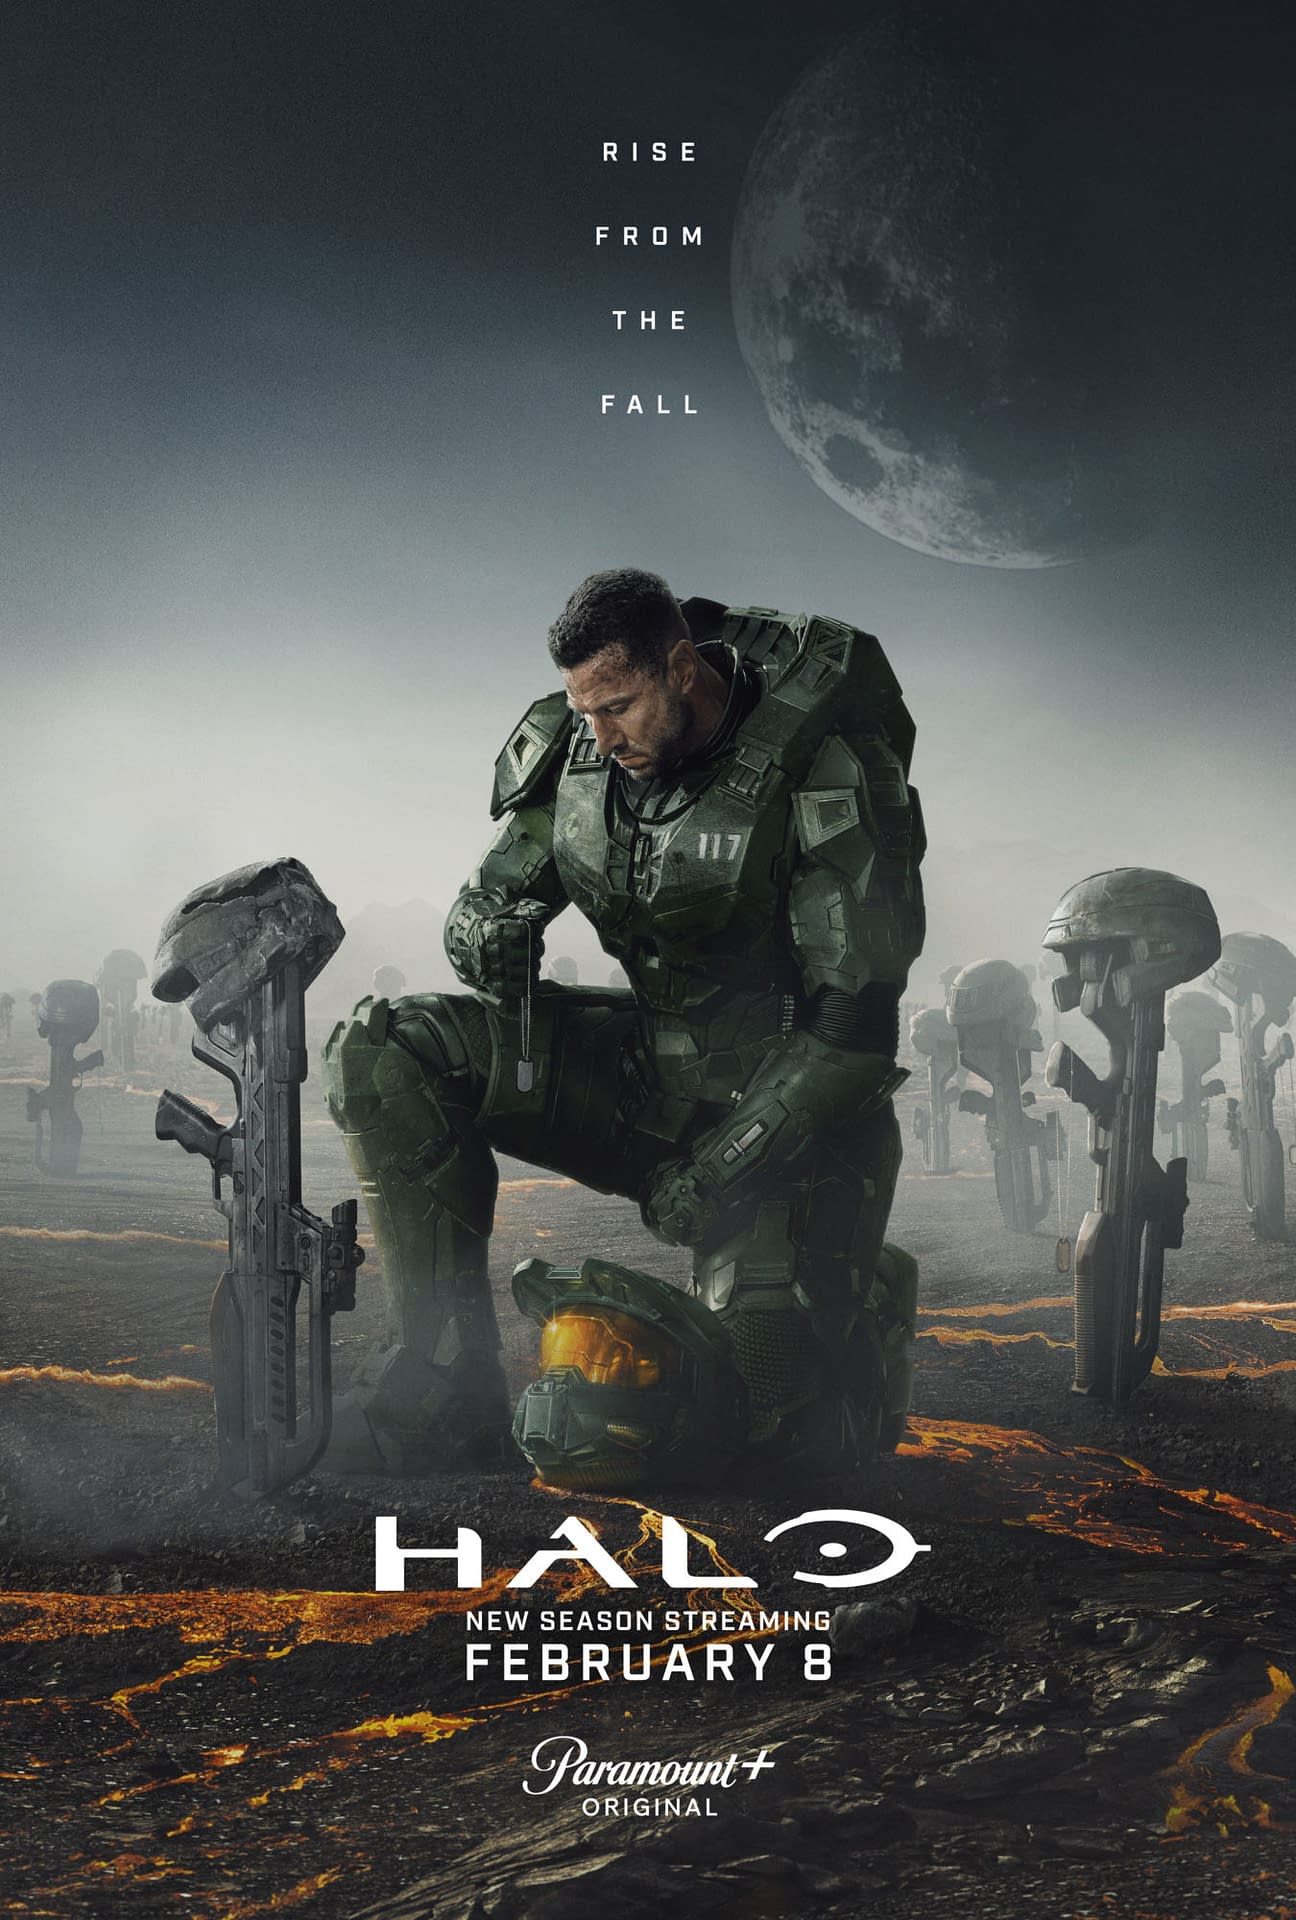 Halo Season 2 Key Art Poster Sees Master Chief Mourning The Fallen